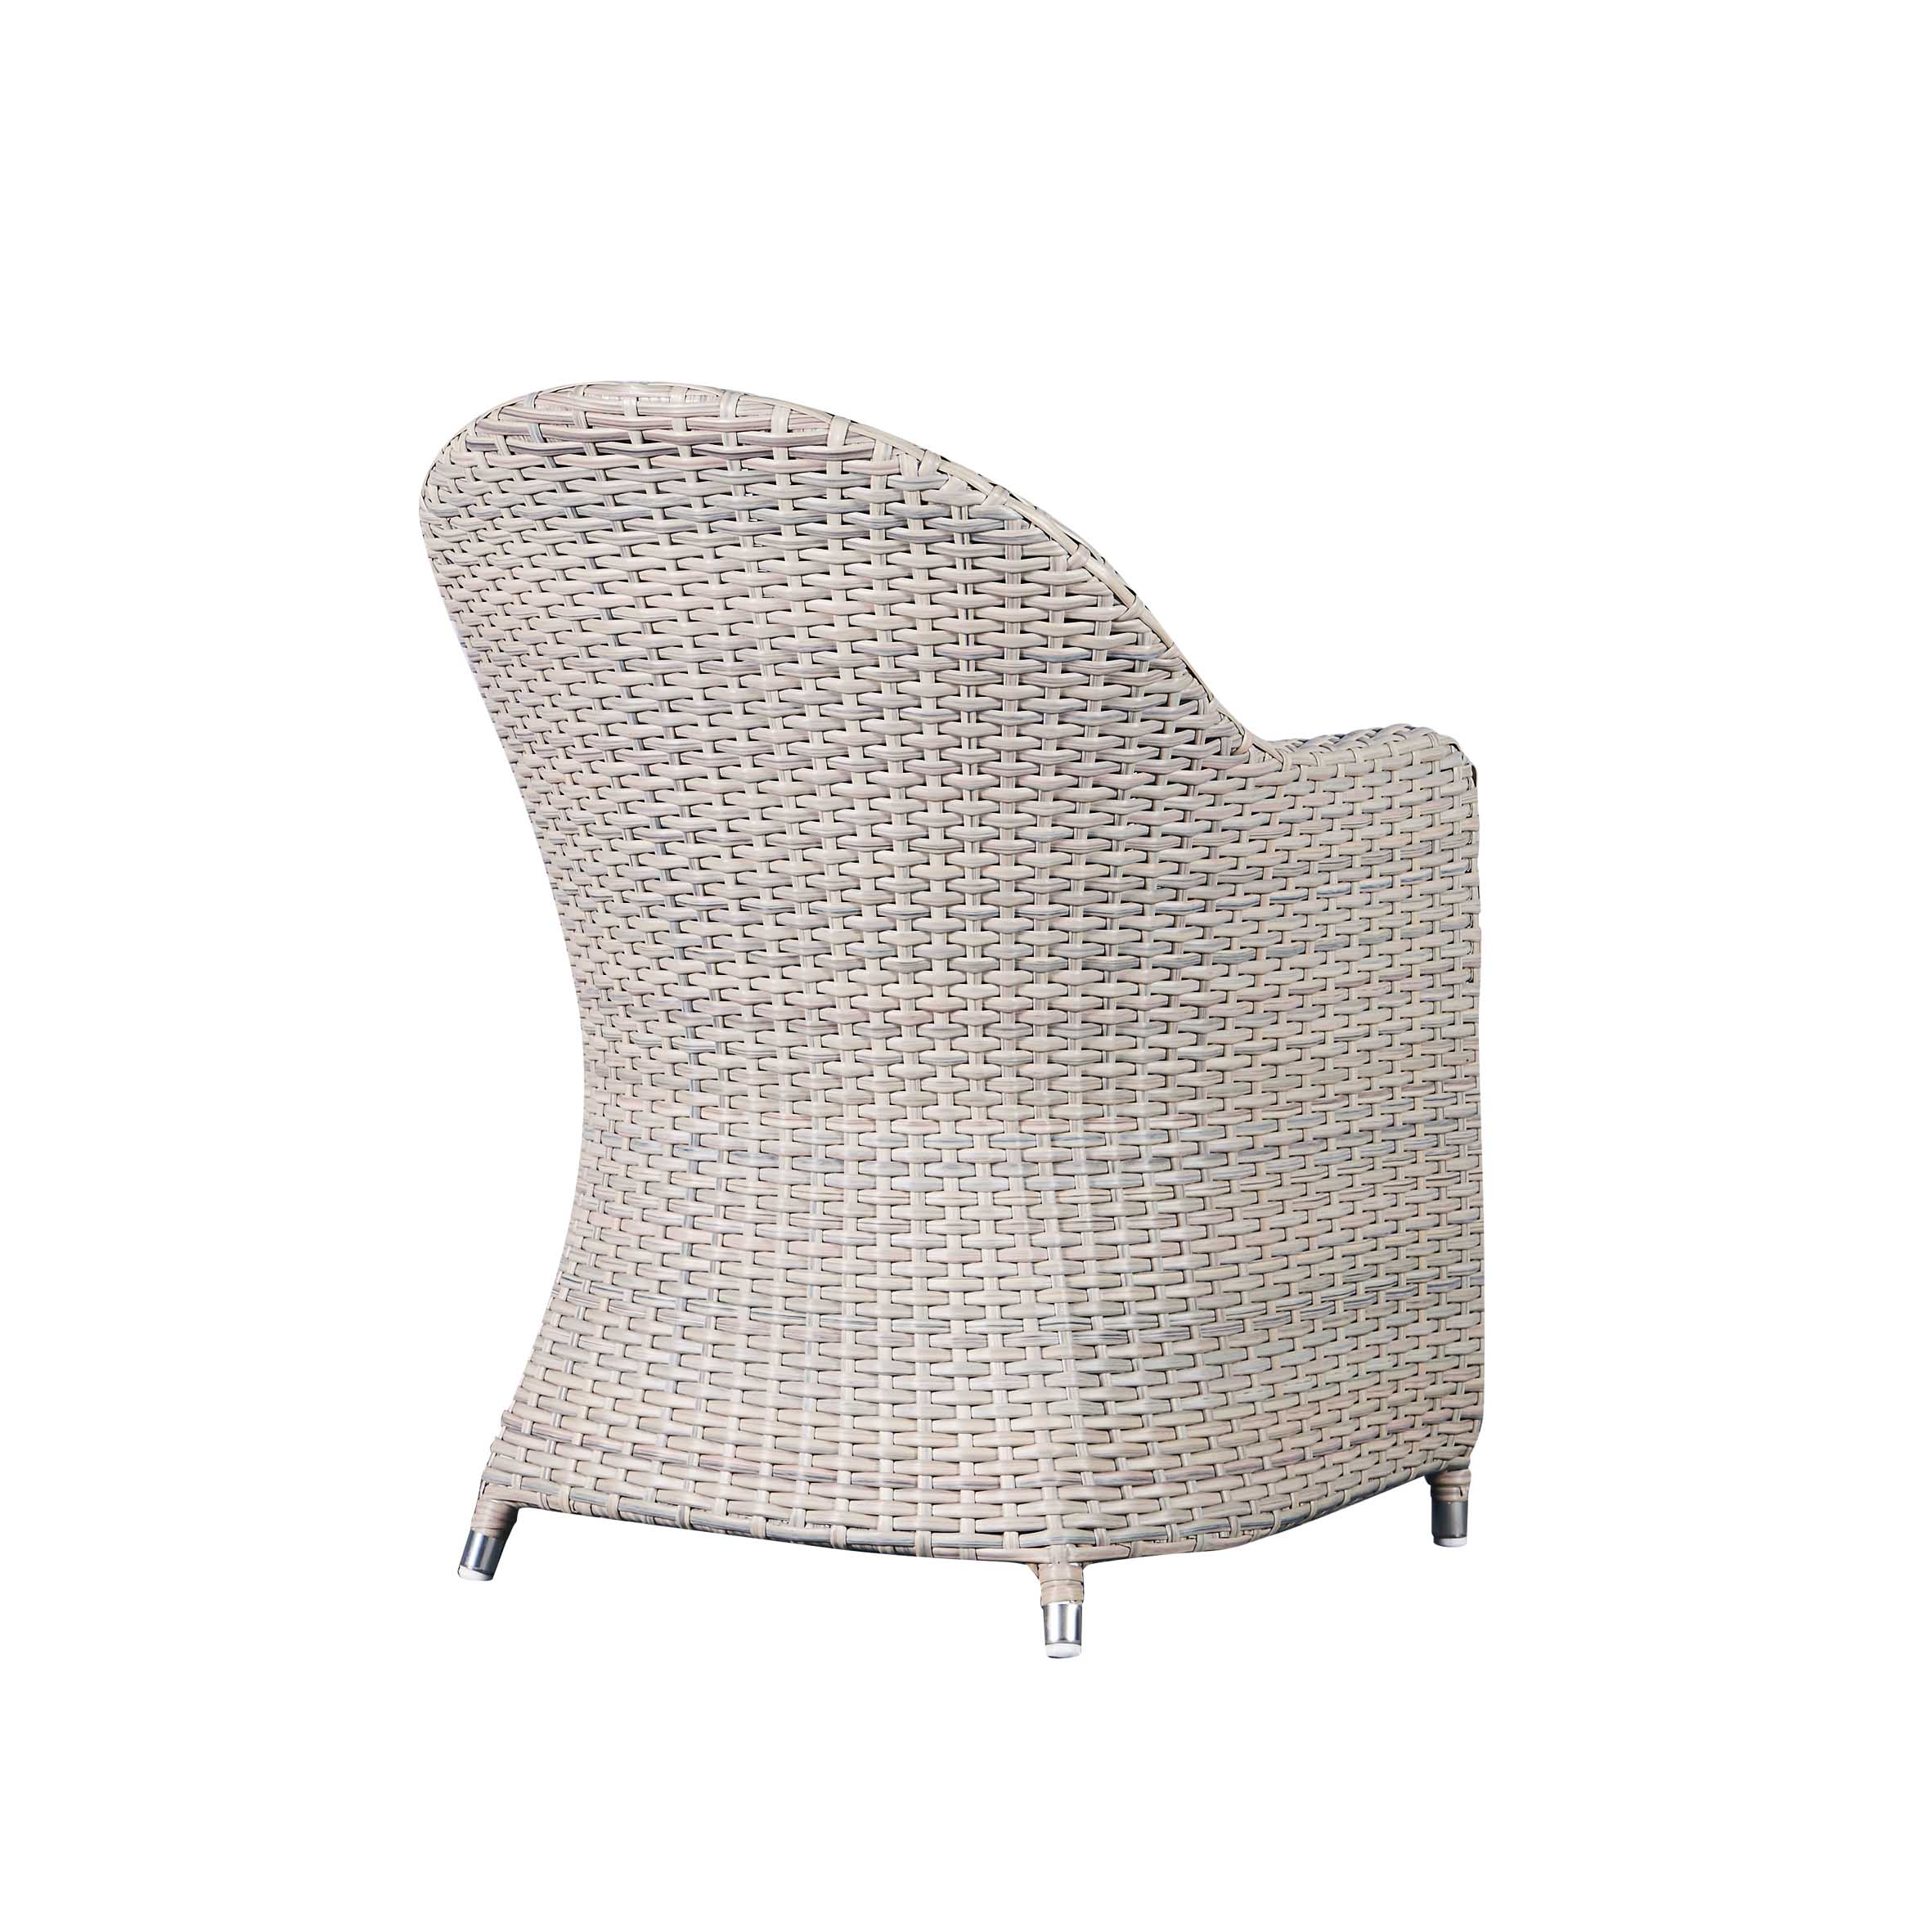 Ideal rattan dining chair S3